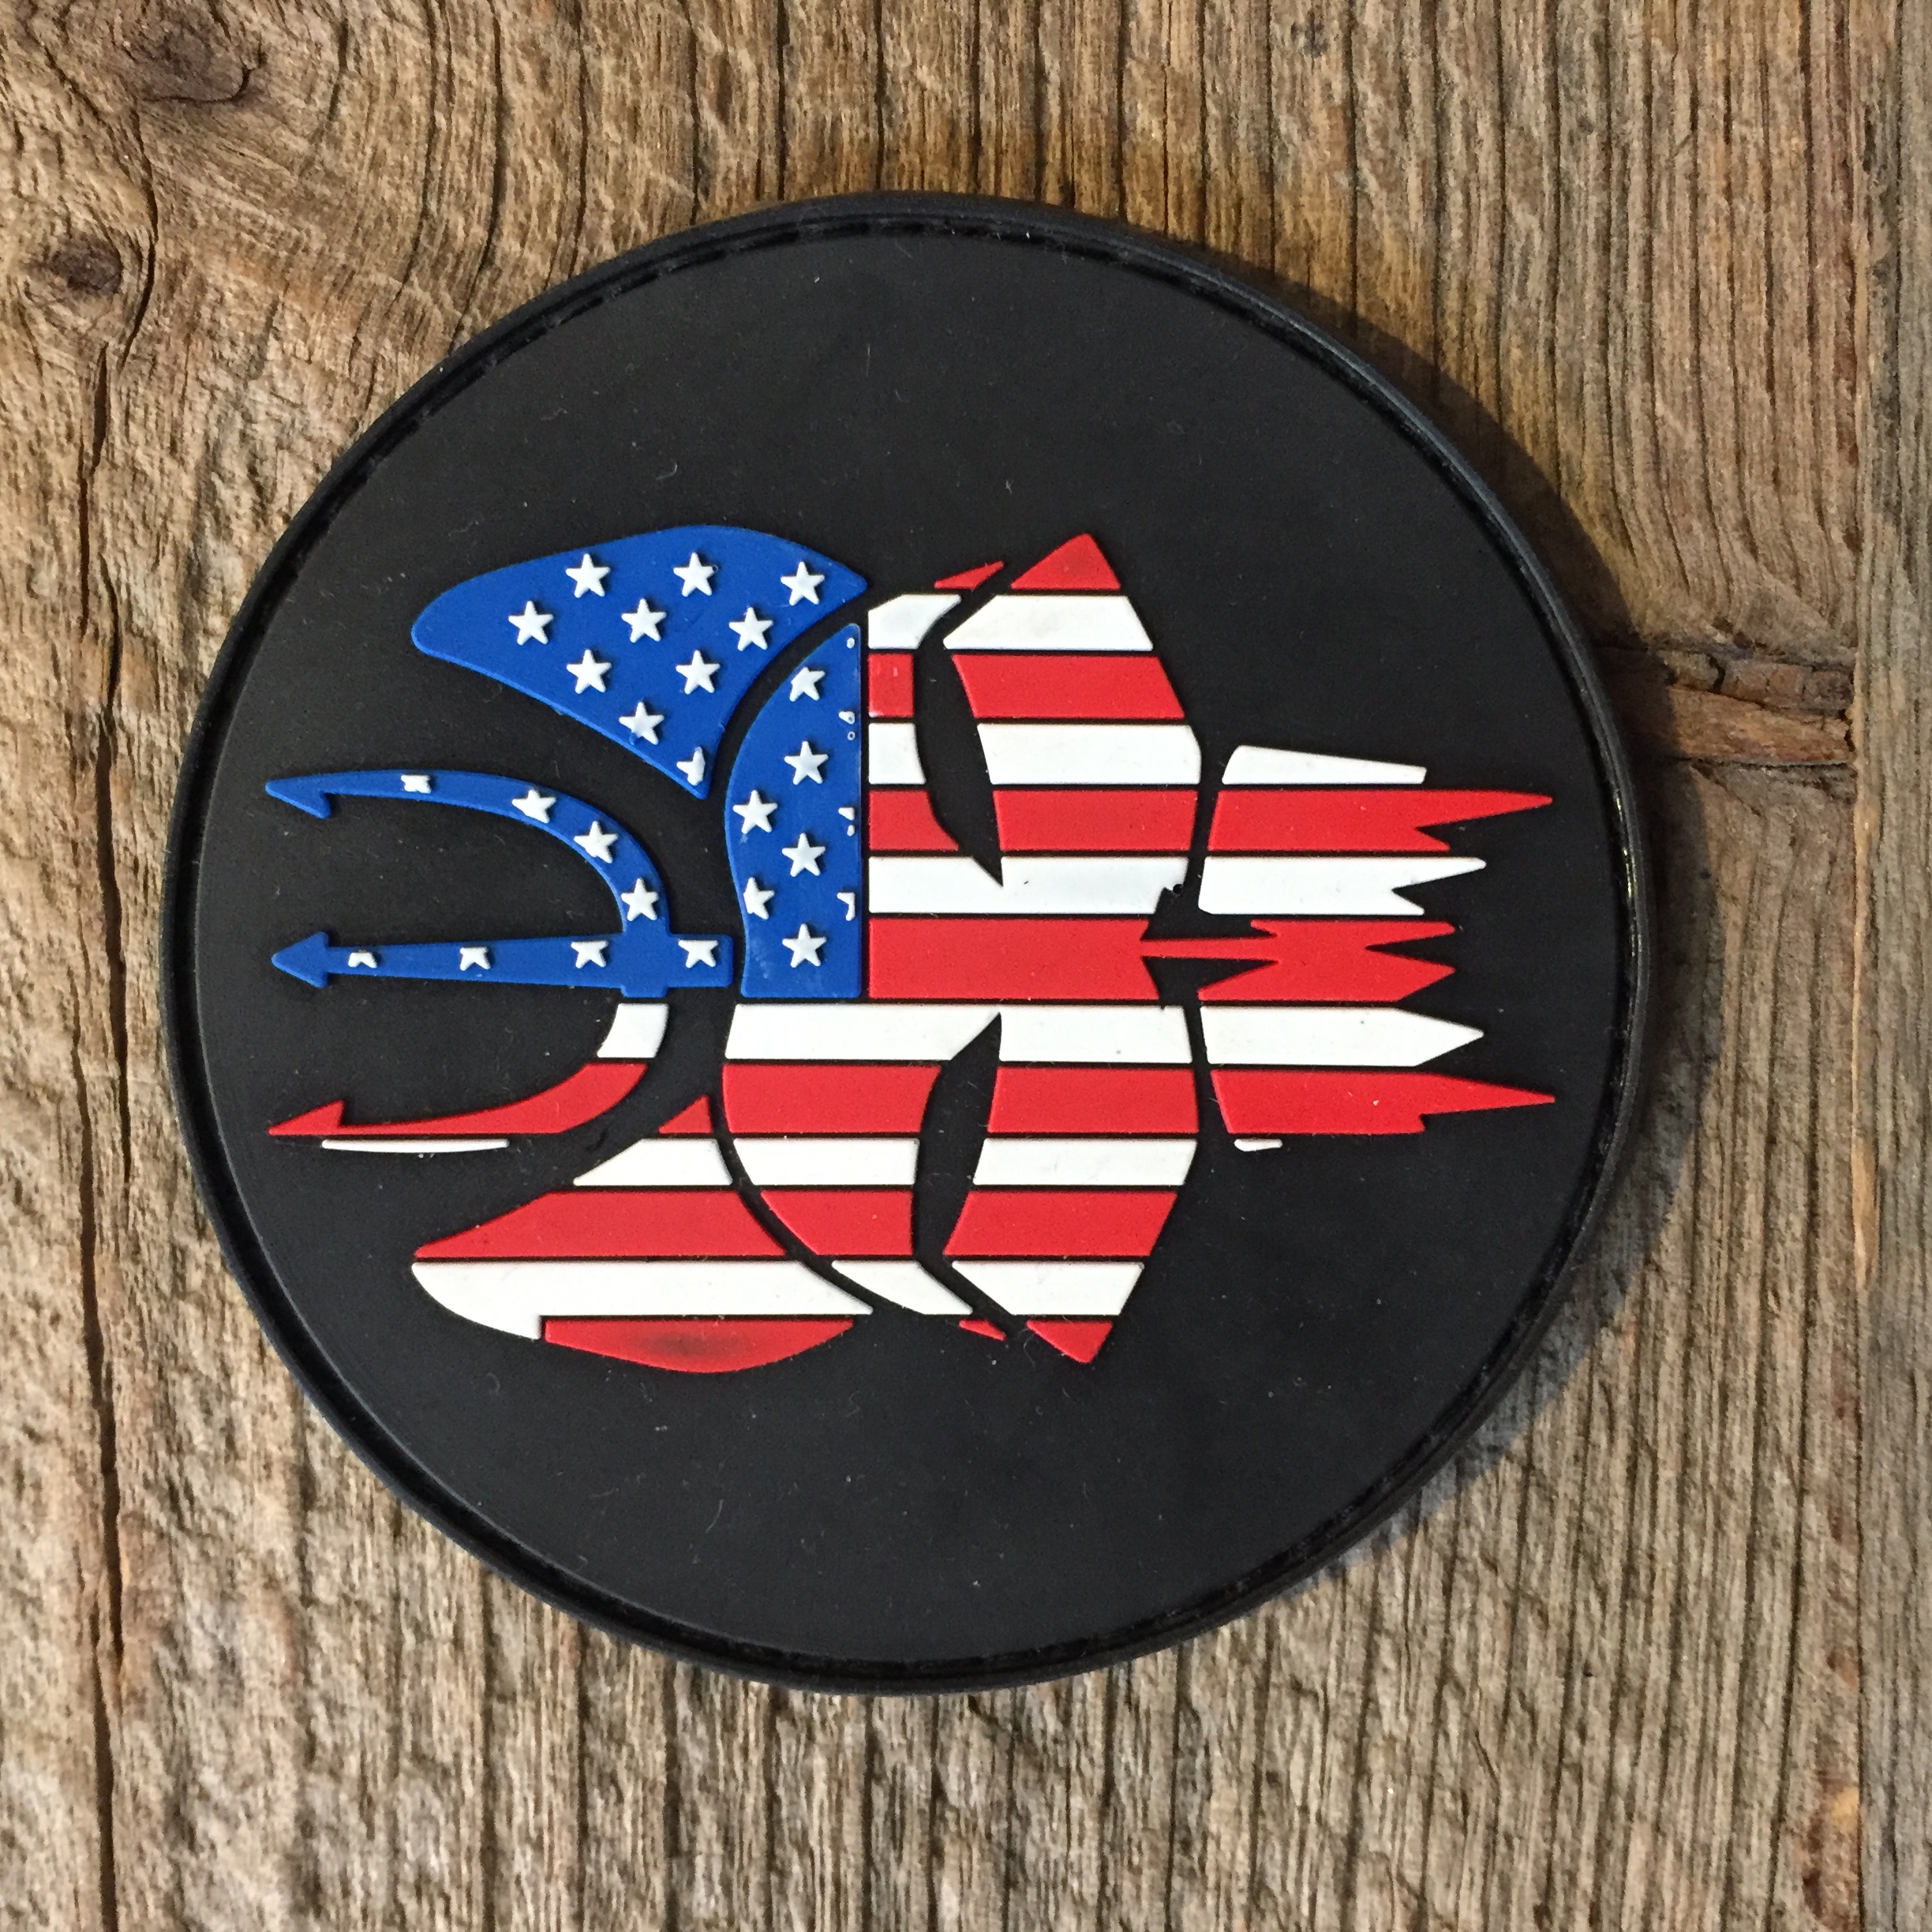 Patch Seal Team realizzata in pvc.